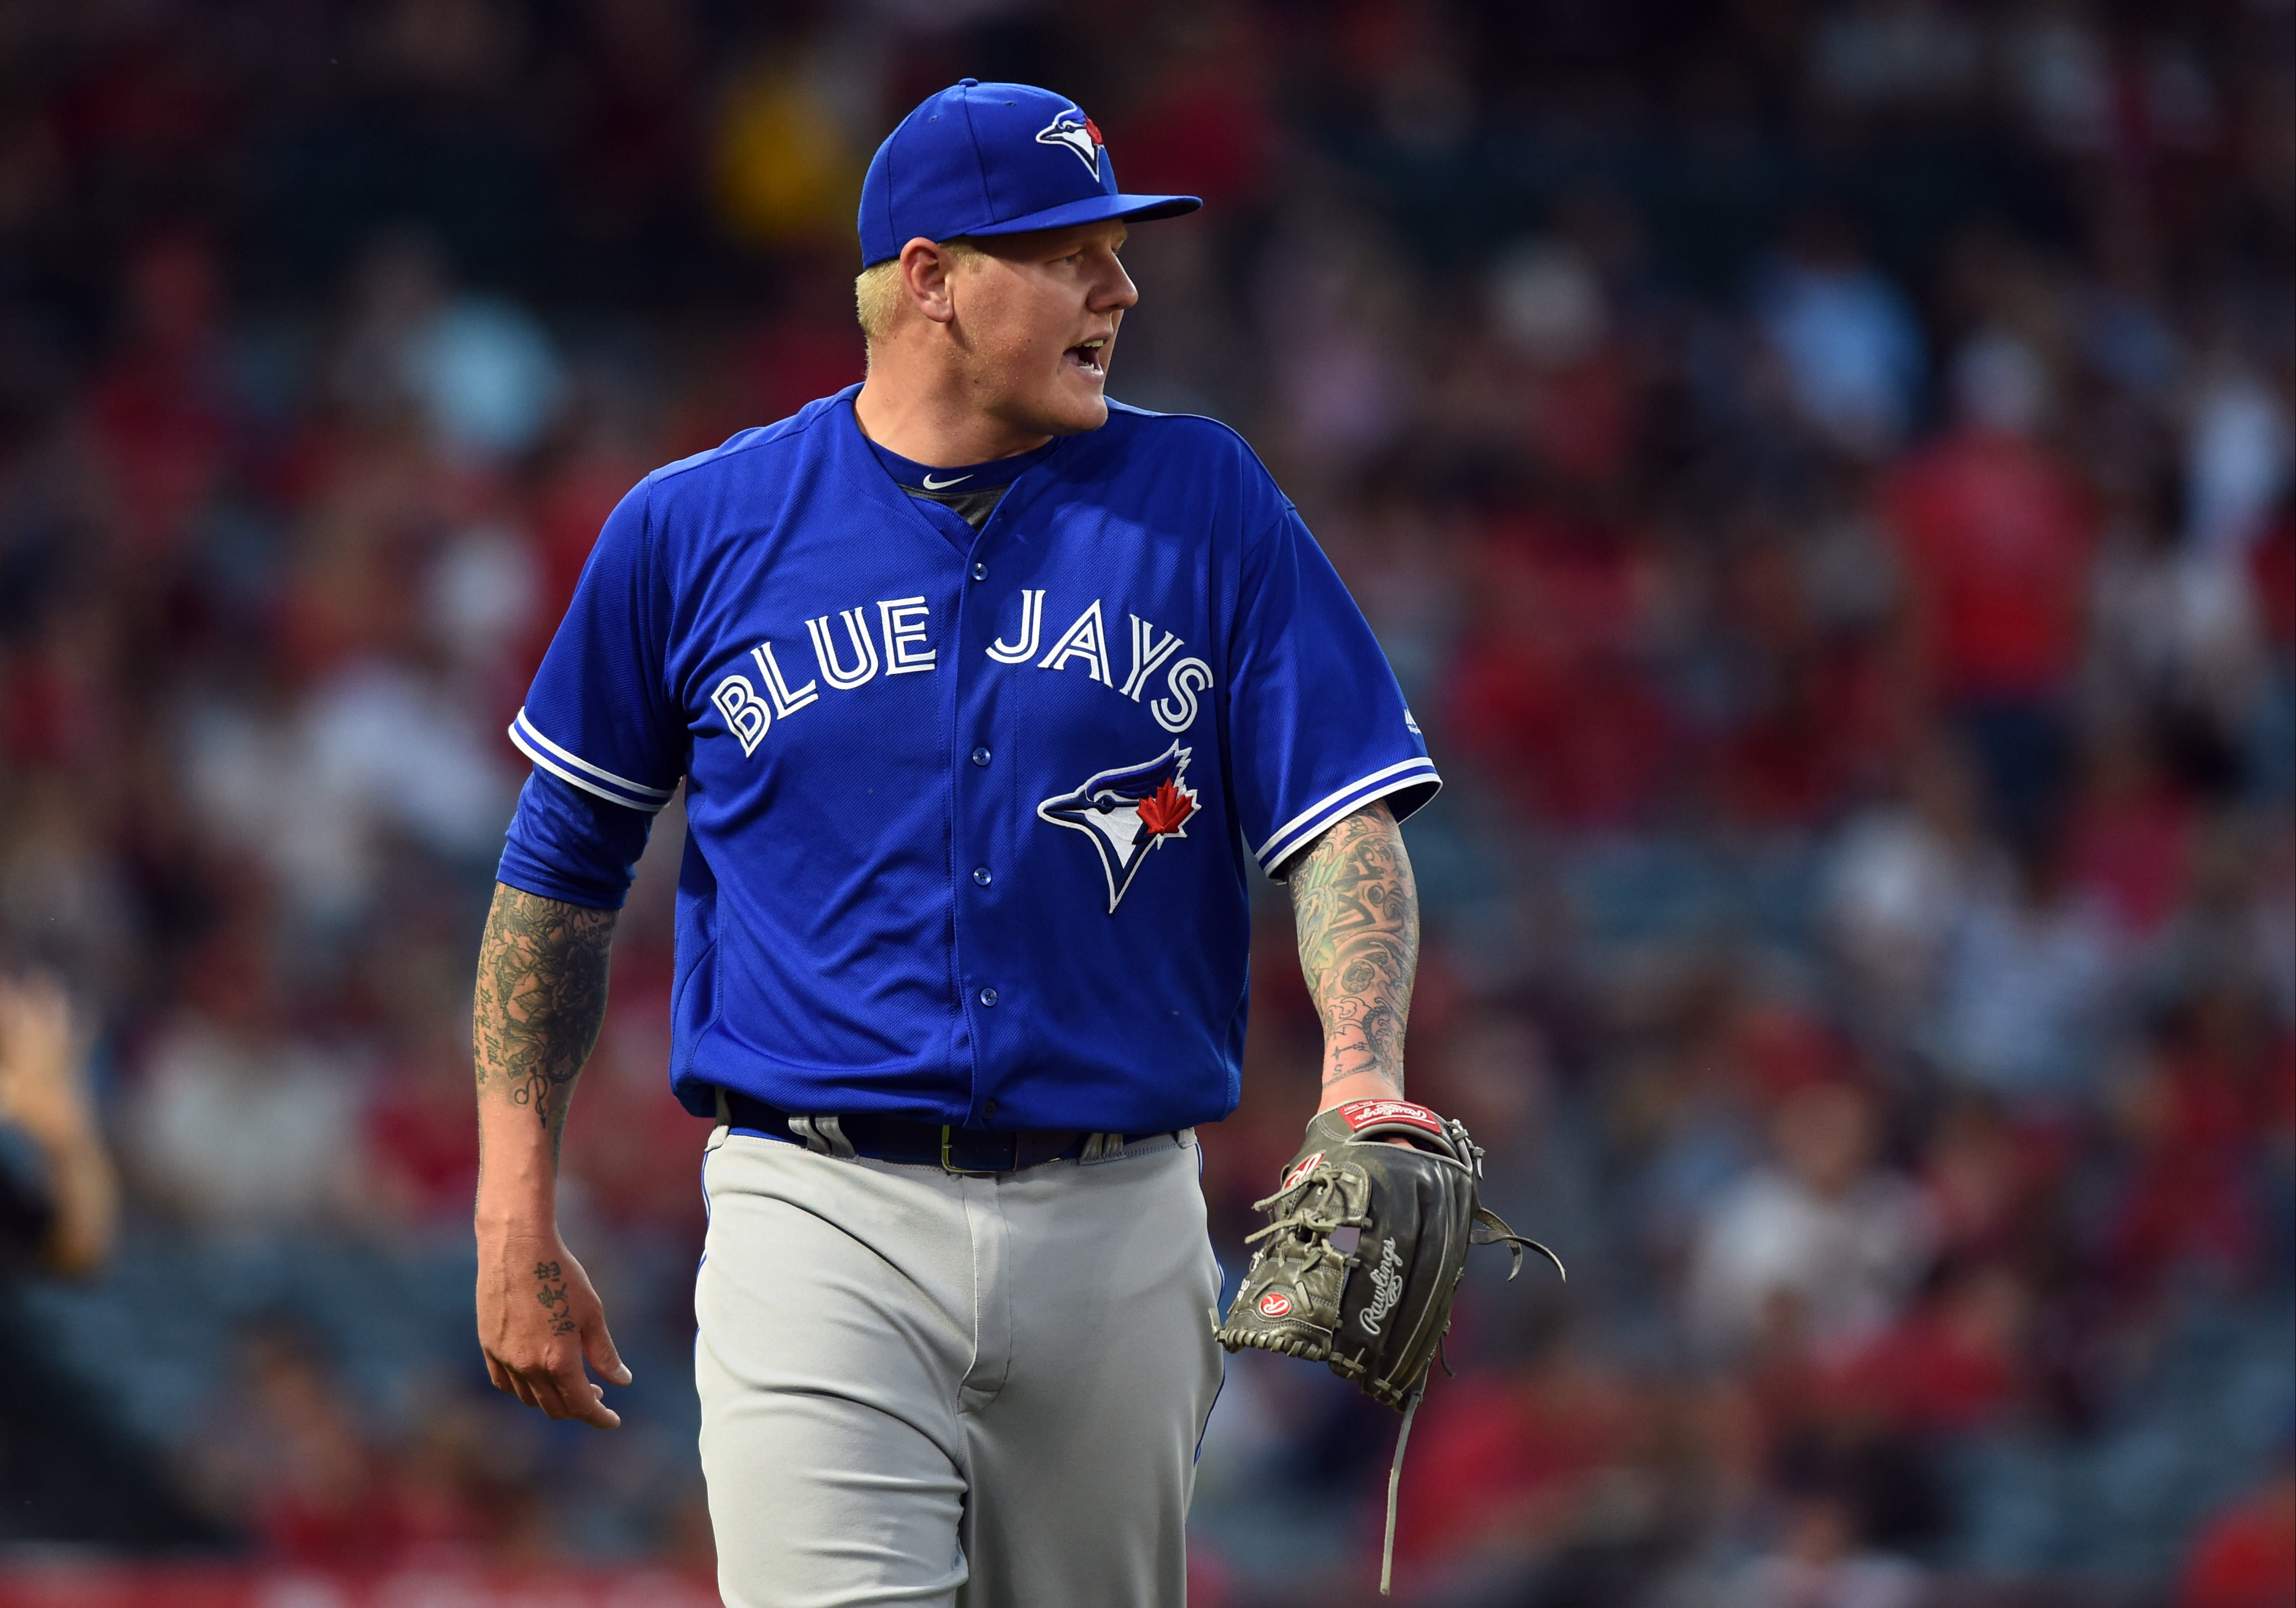 former-mlb-pitcher-ordered-to-stay-away-from-ex-over-violent-threats